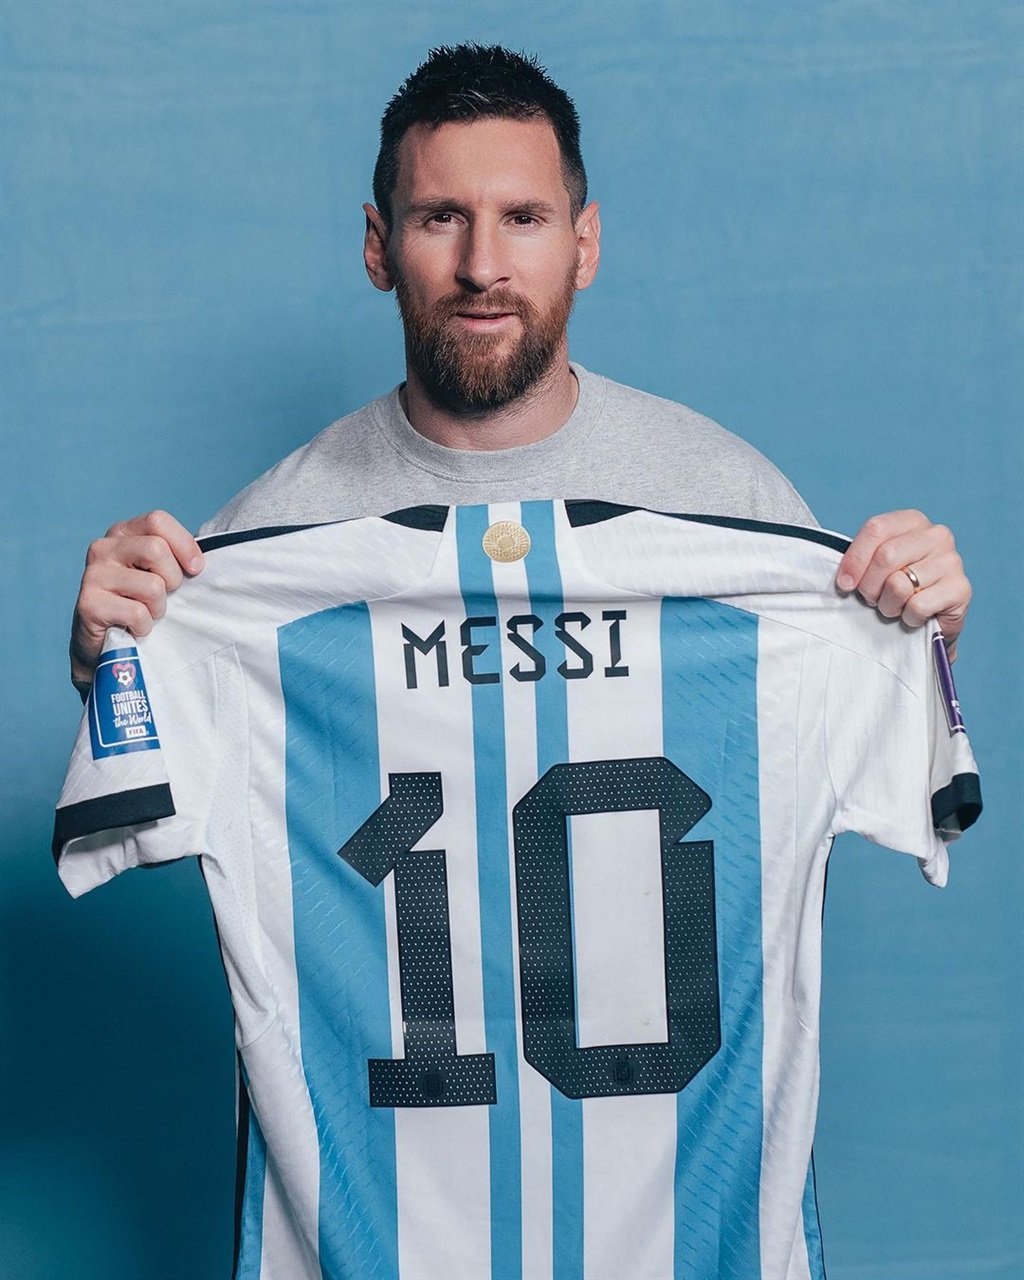 Lionel Messi's World Cup match jerseys are reportedly set to sell for over R100 million at an auction, overtaking a world record set by Michael Jordan. 